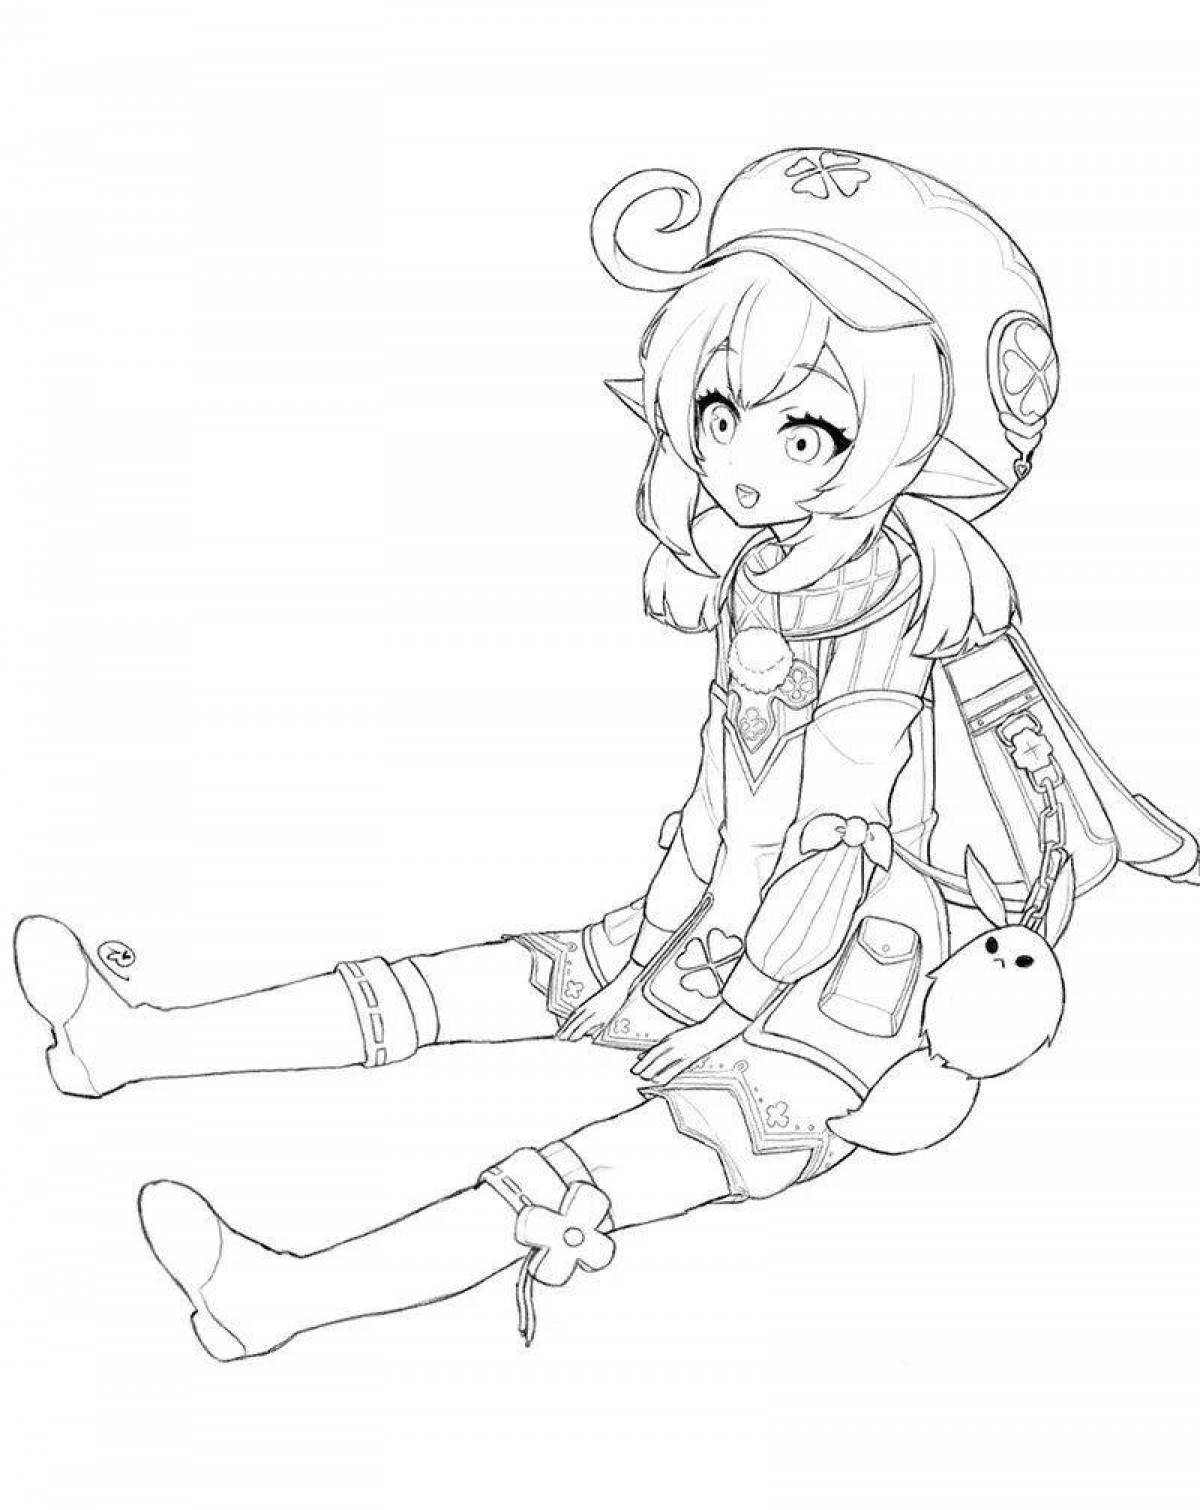 Adorable xiao chibi coloring page